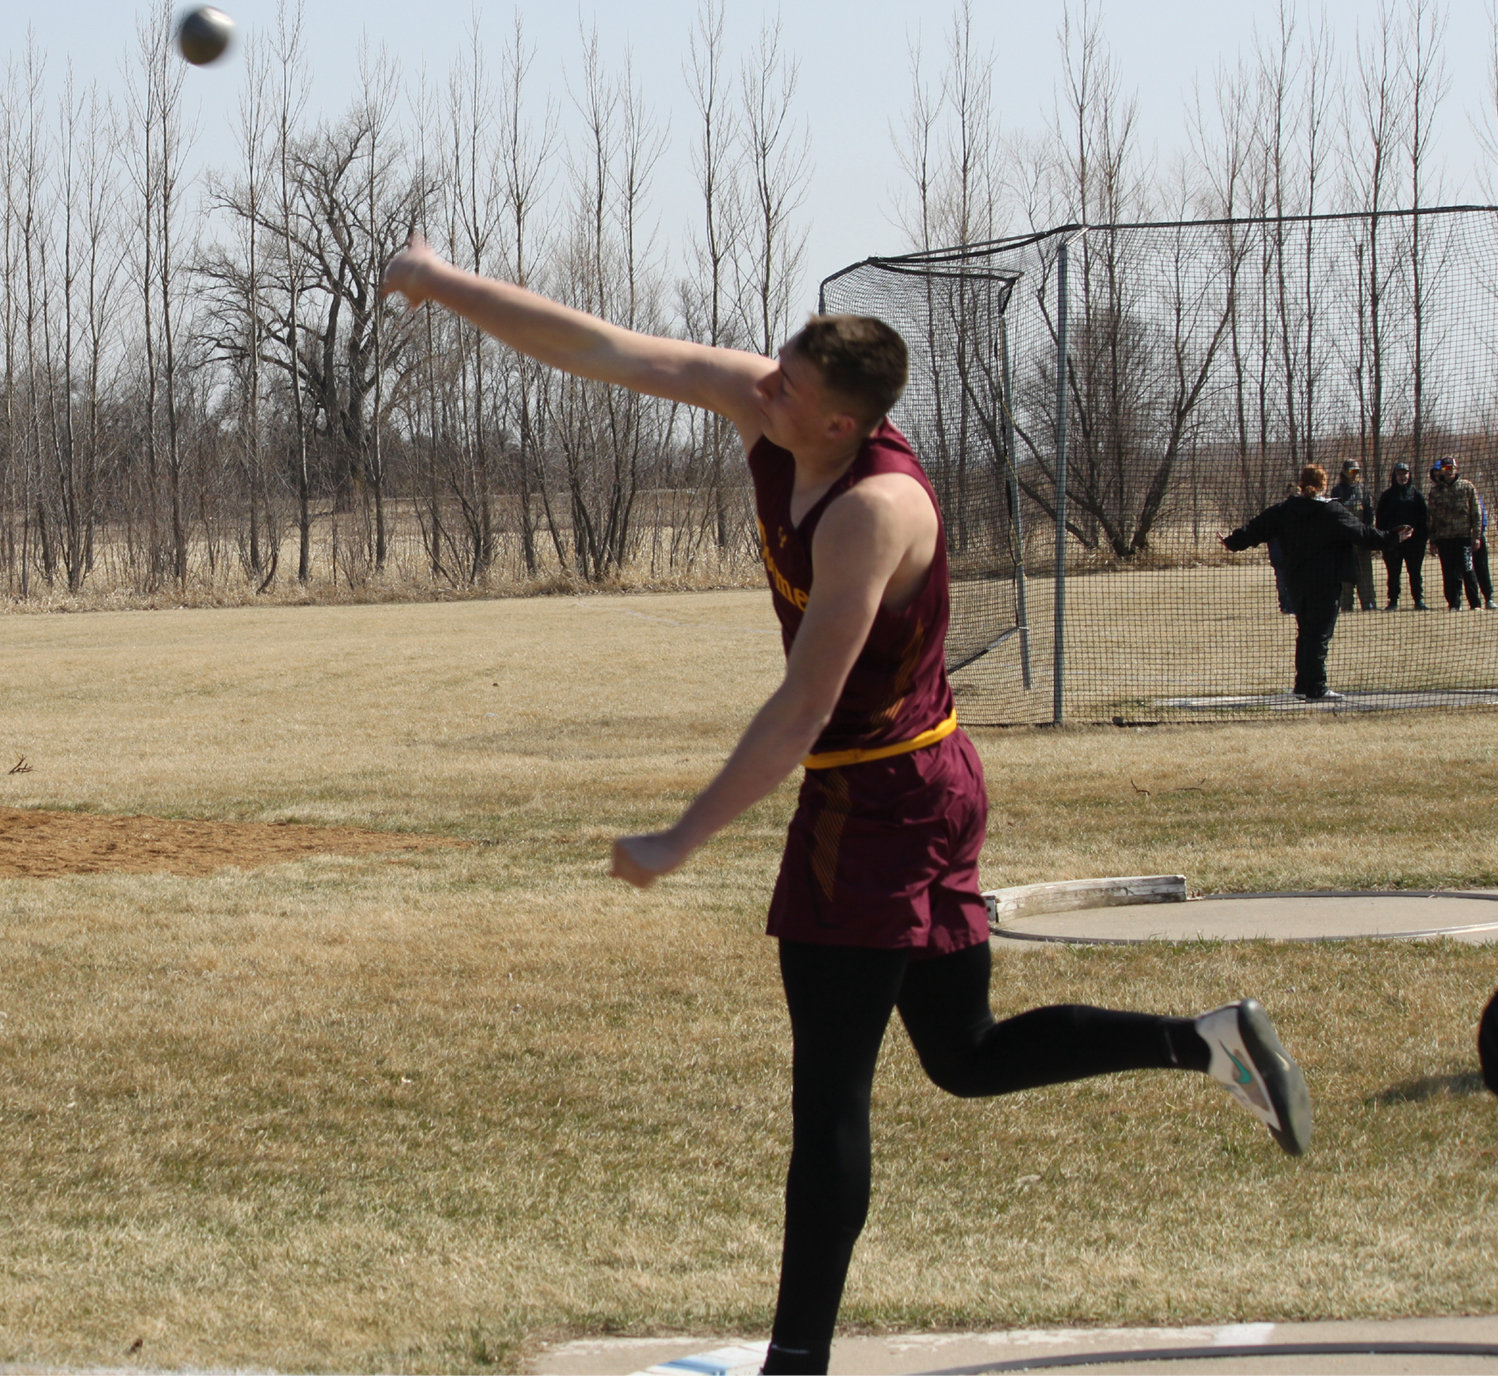 Damon Wilkinson got 2nd place in shot put with 46' 8.25" at the track meet in Estelline.